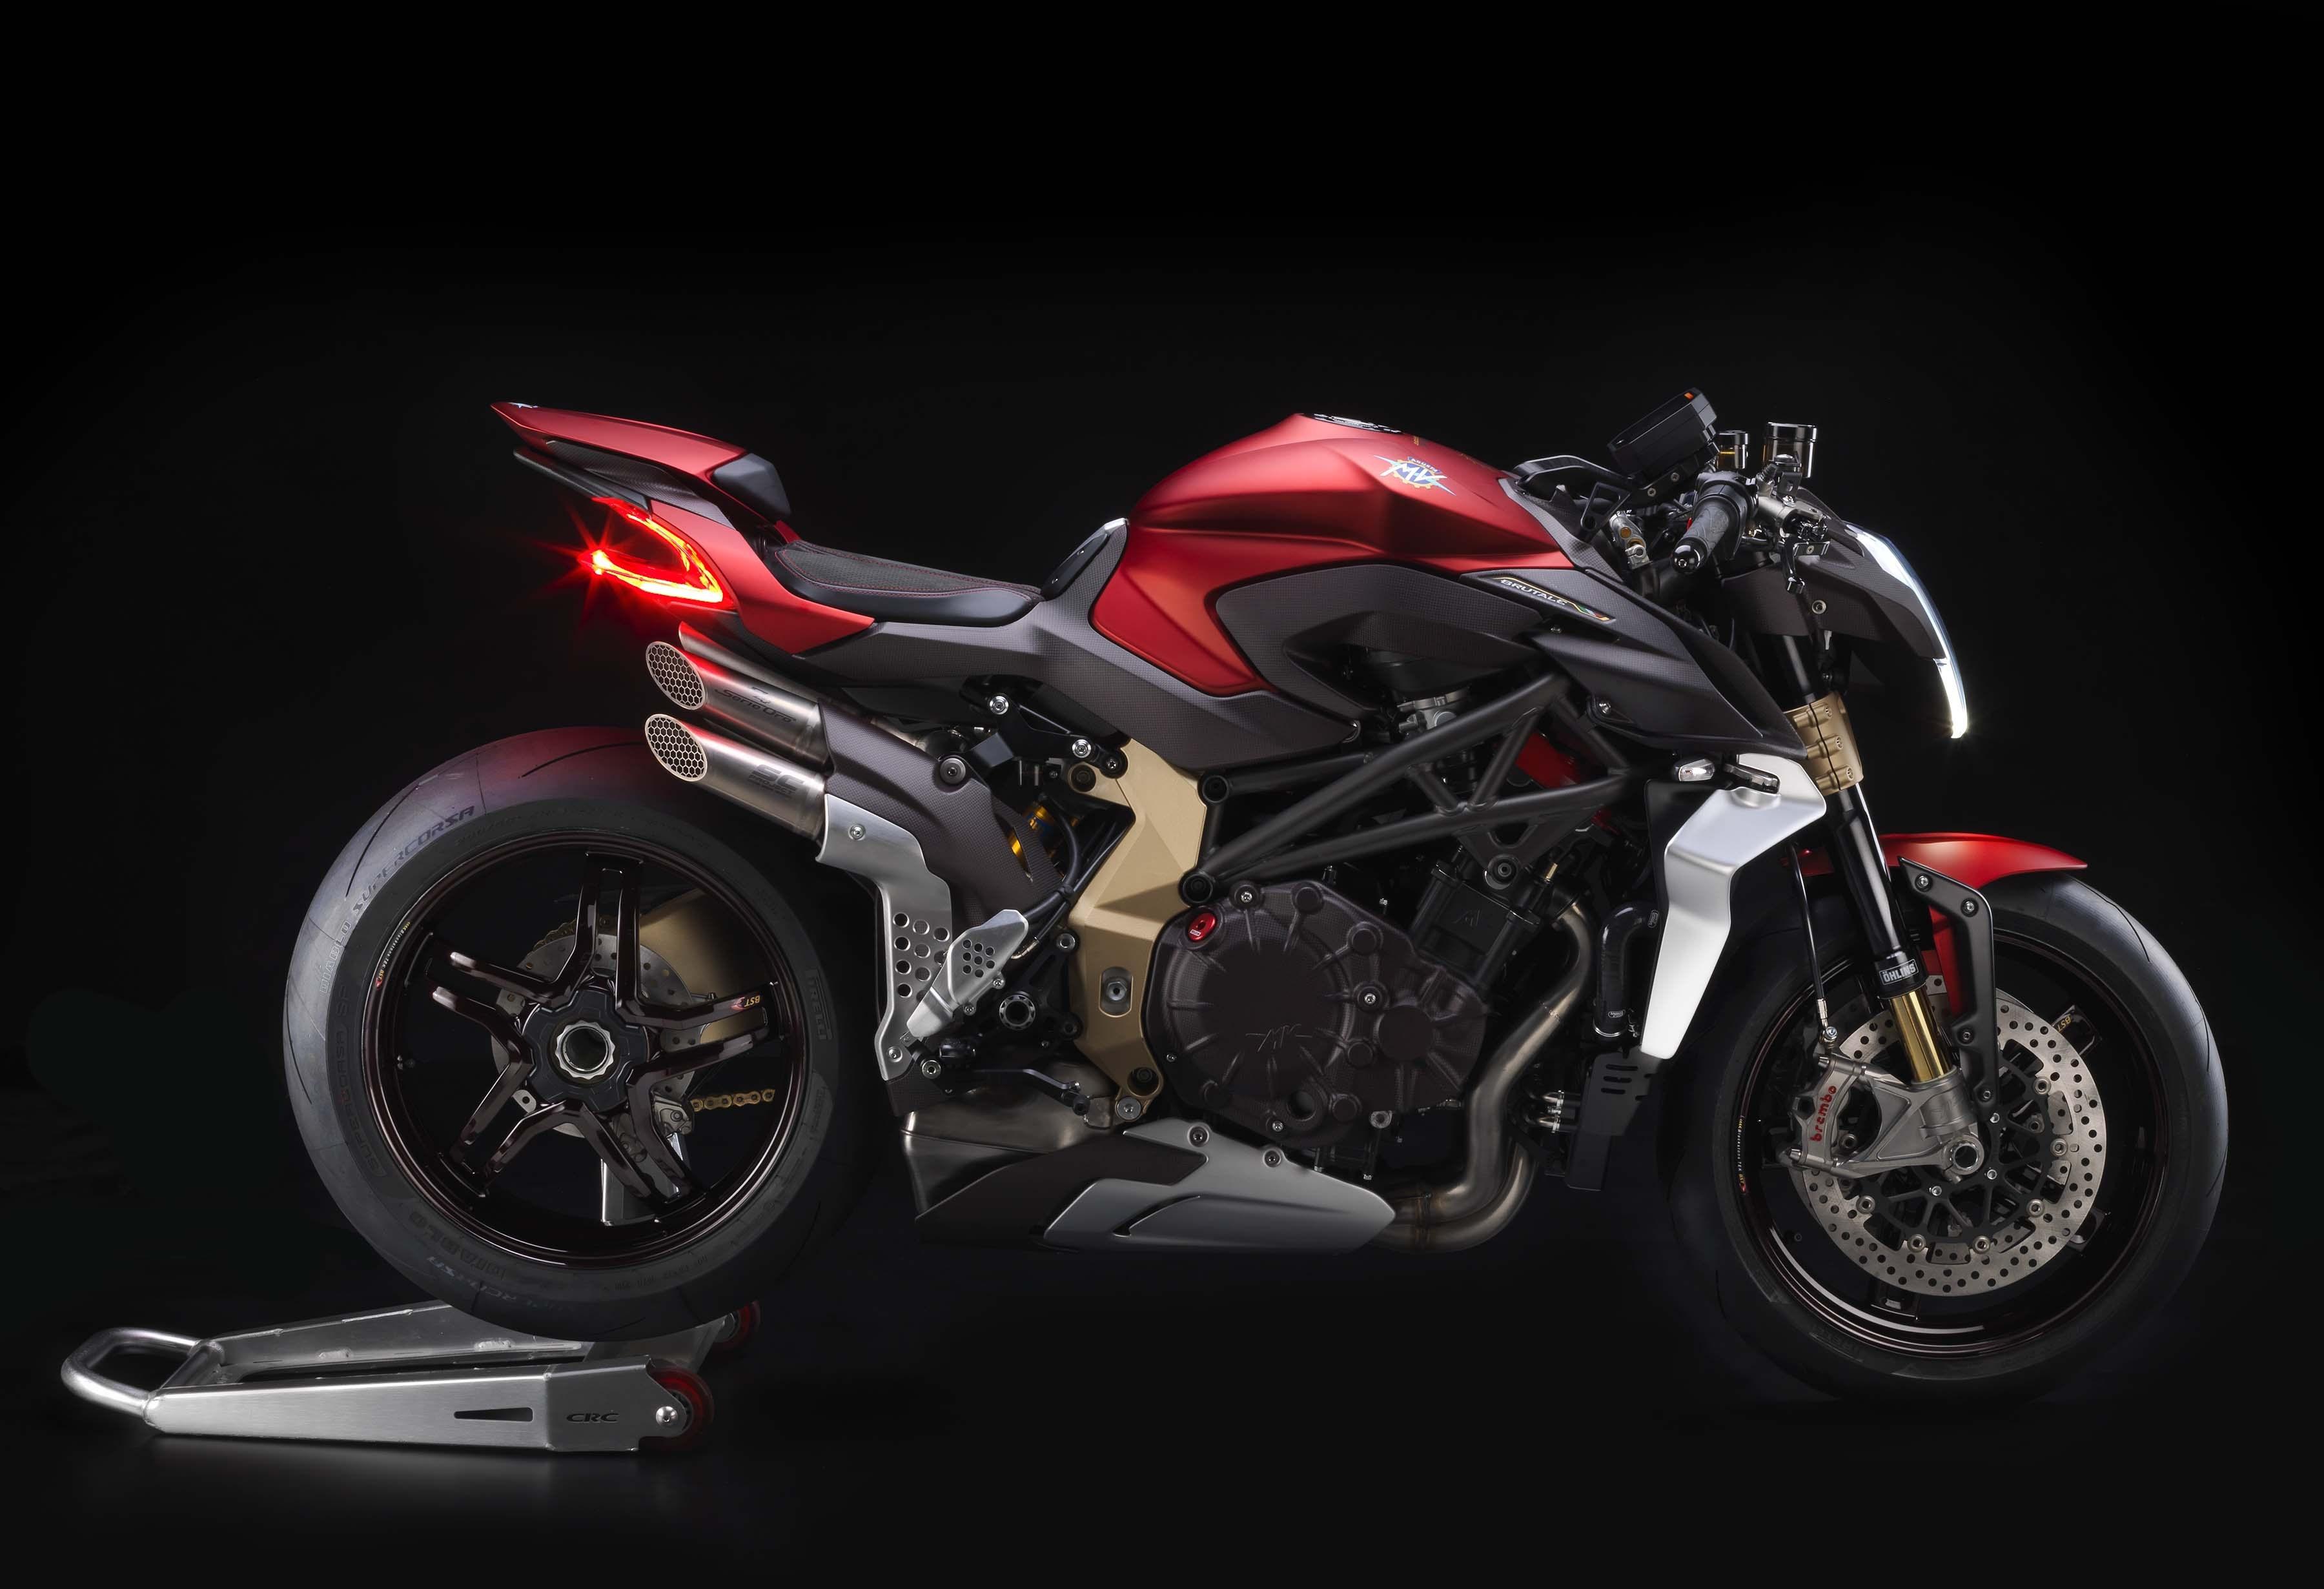 MV Agusta Brutale 1000 Serie Oro New Generation of Style